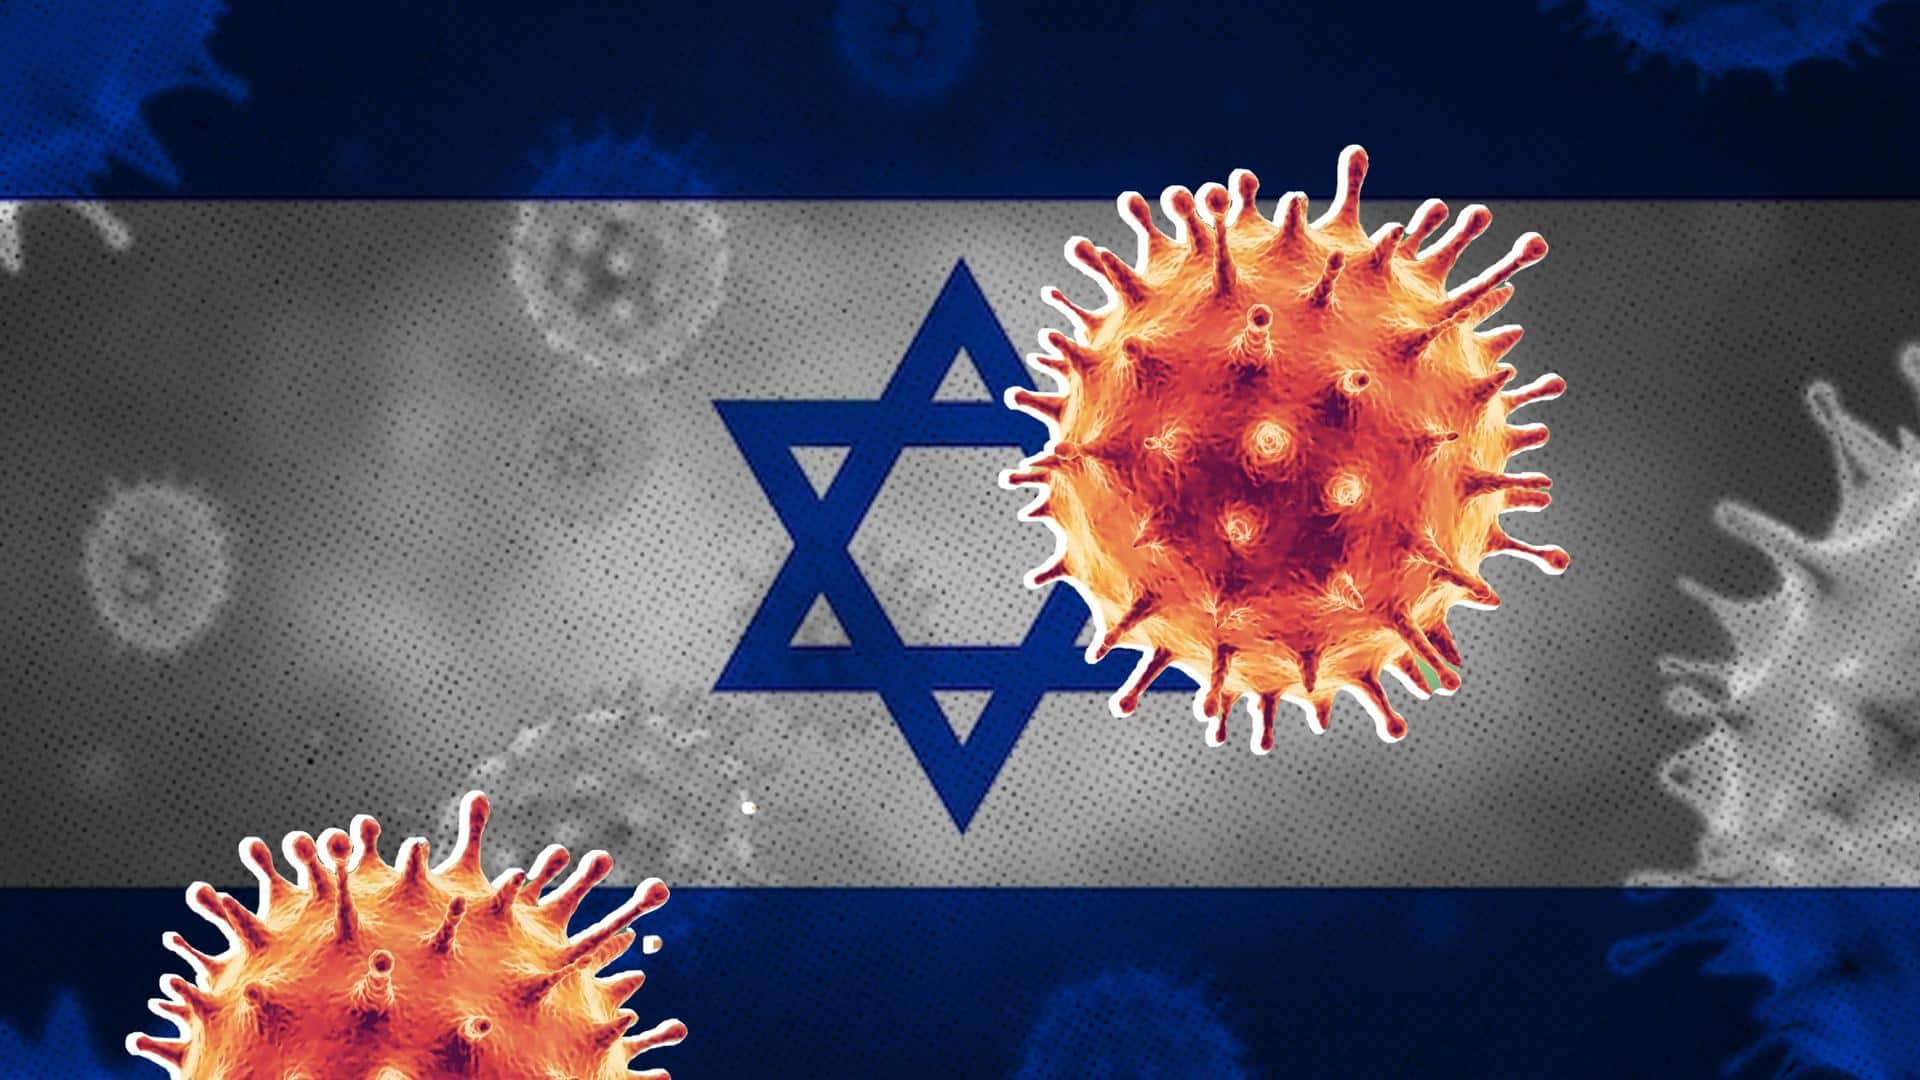 Cases of new unidentified COVID-19 variant reported in Israel